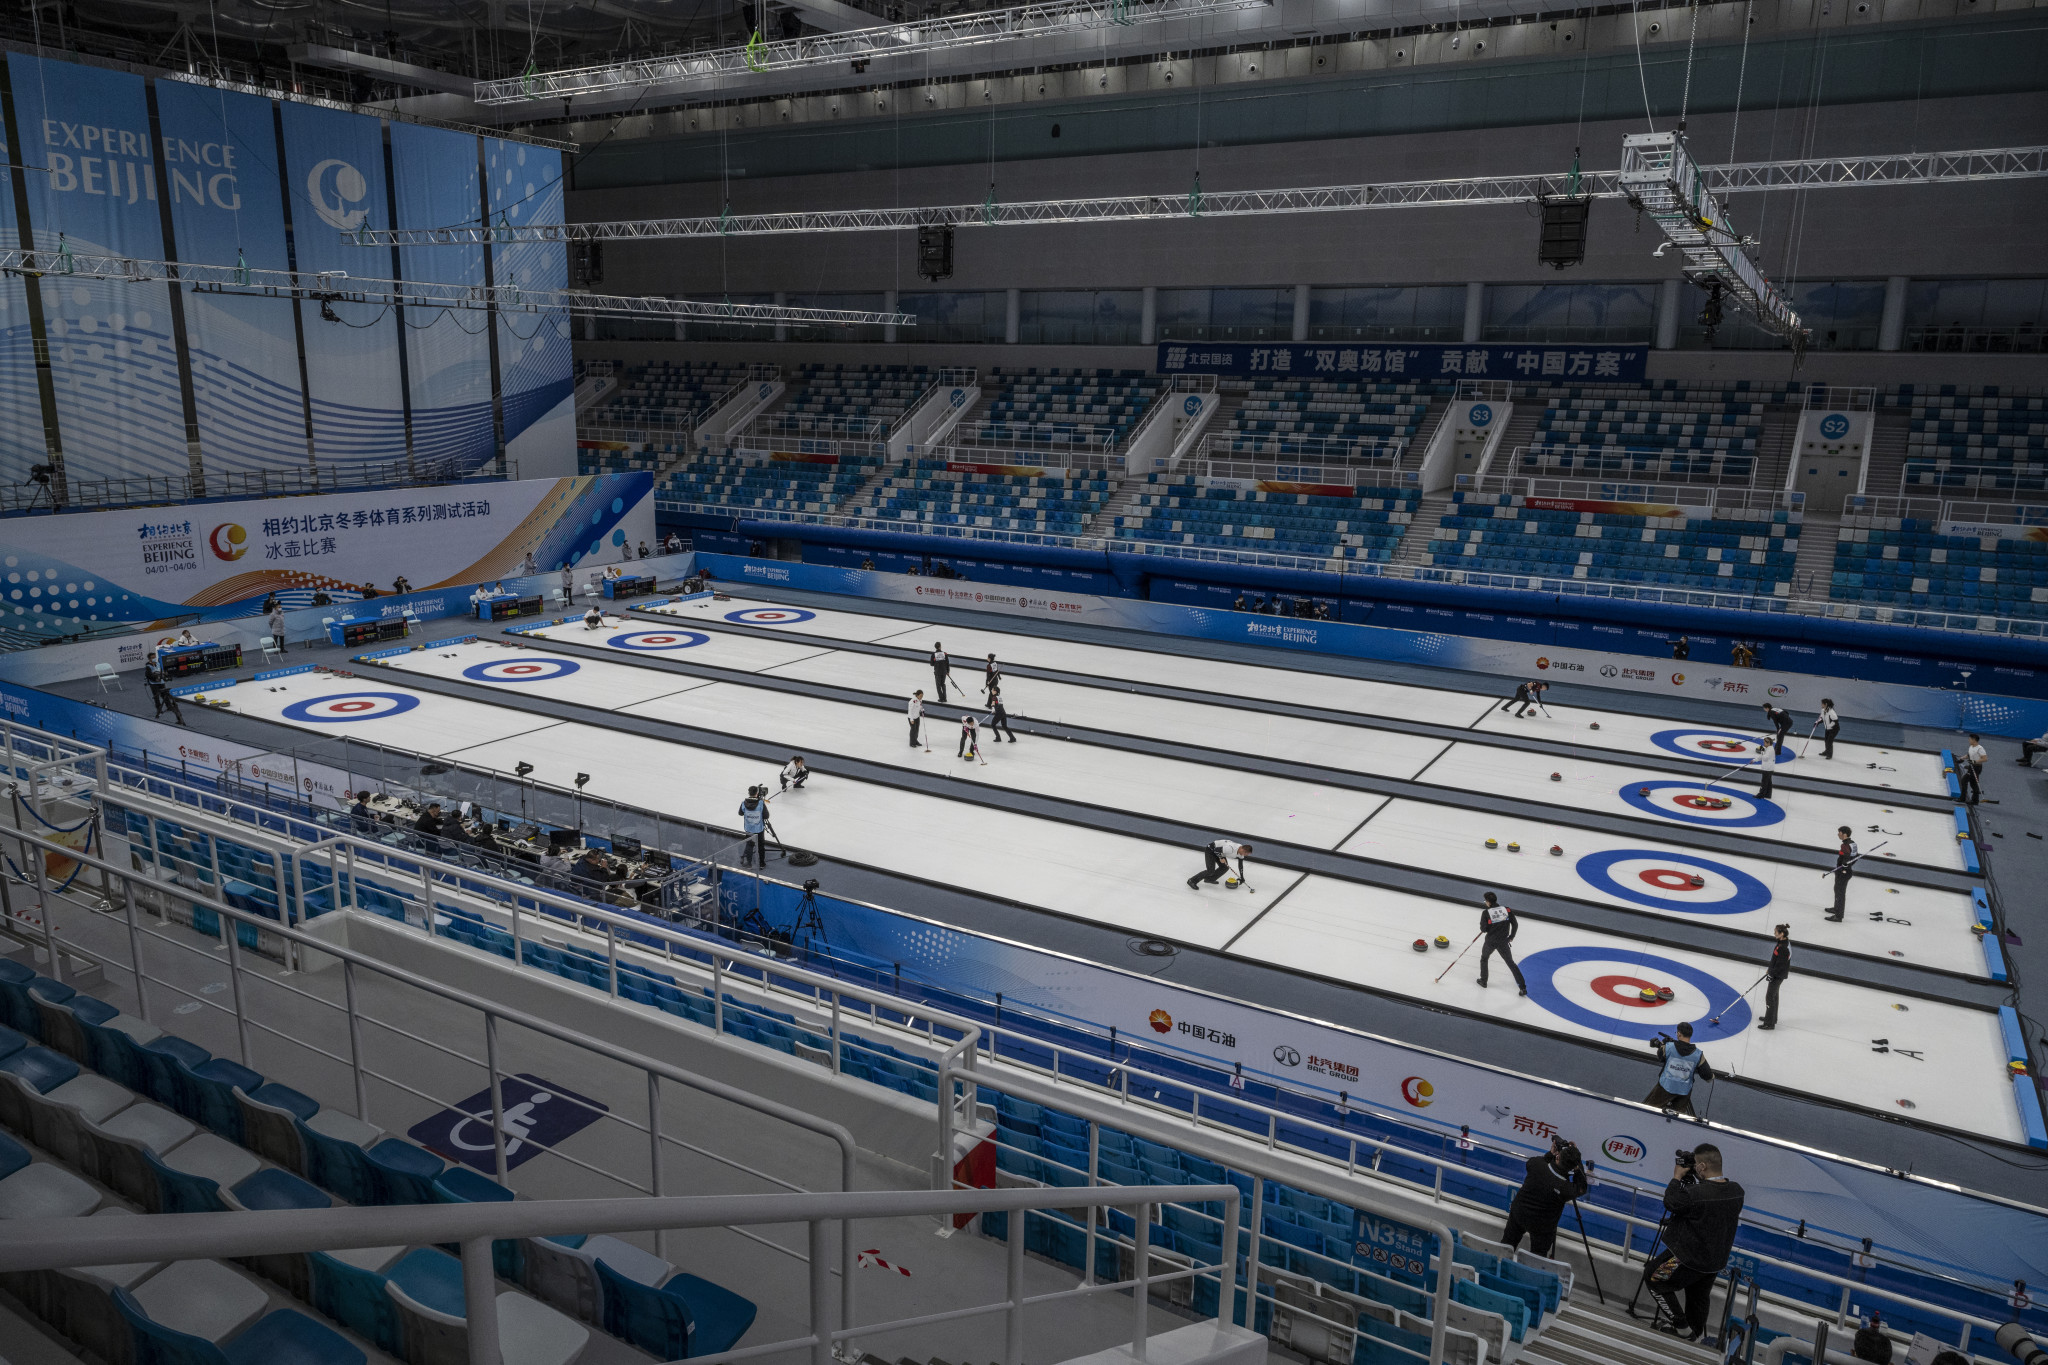 Curling is taking place at the National Aquatics Centre, which is now known as the Ice Cube ©Getty Images